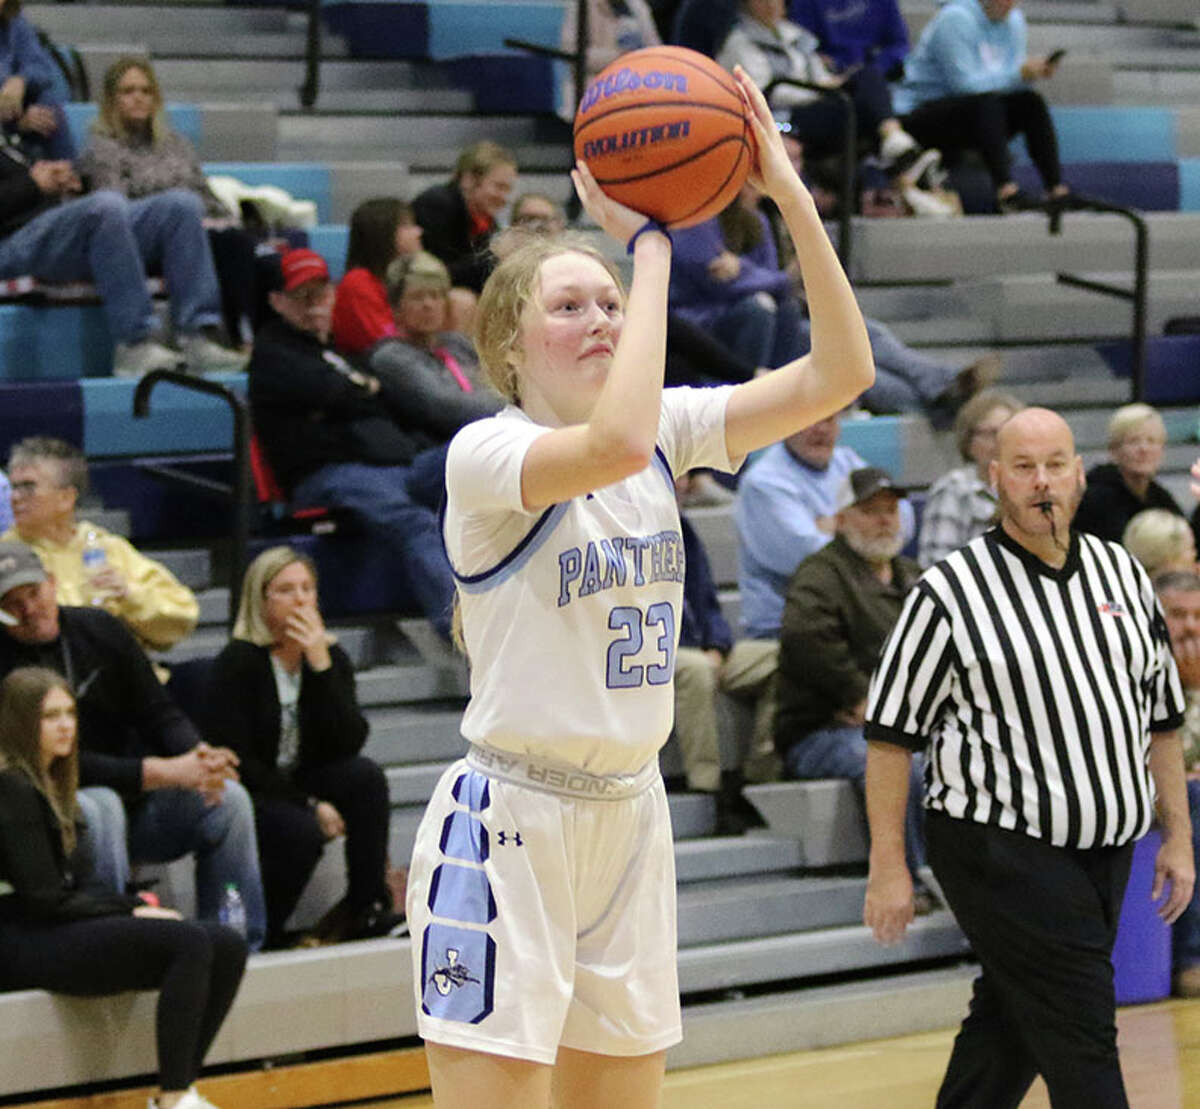 Jersey freshman Meredith Gray, shown taking a shot in a game earlier this season in Jerseyville, scored 18 points Saturday in the Panthers' regional win over Triad at Havens Gym in Jerseyville.